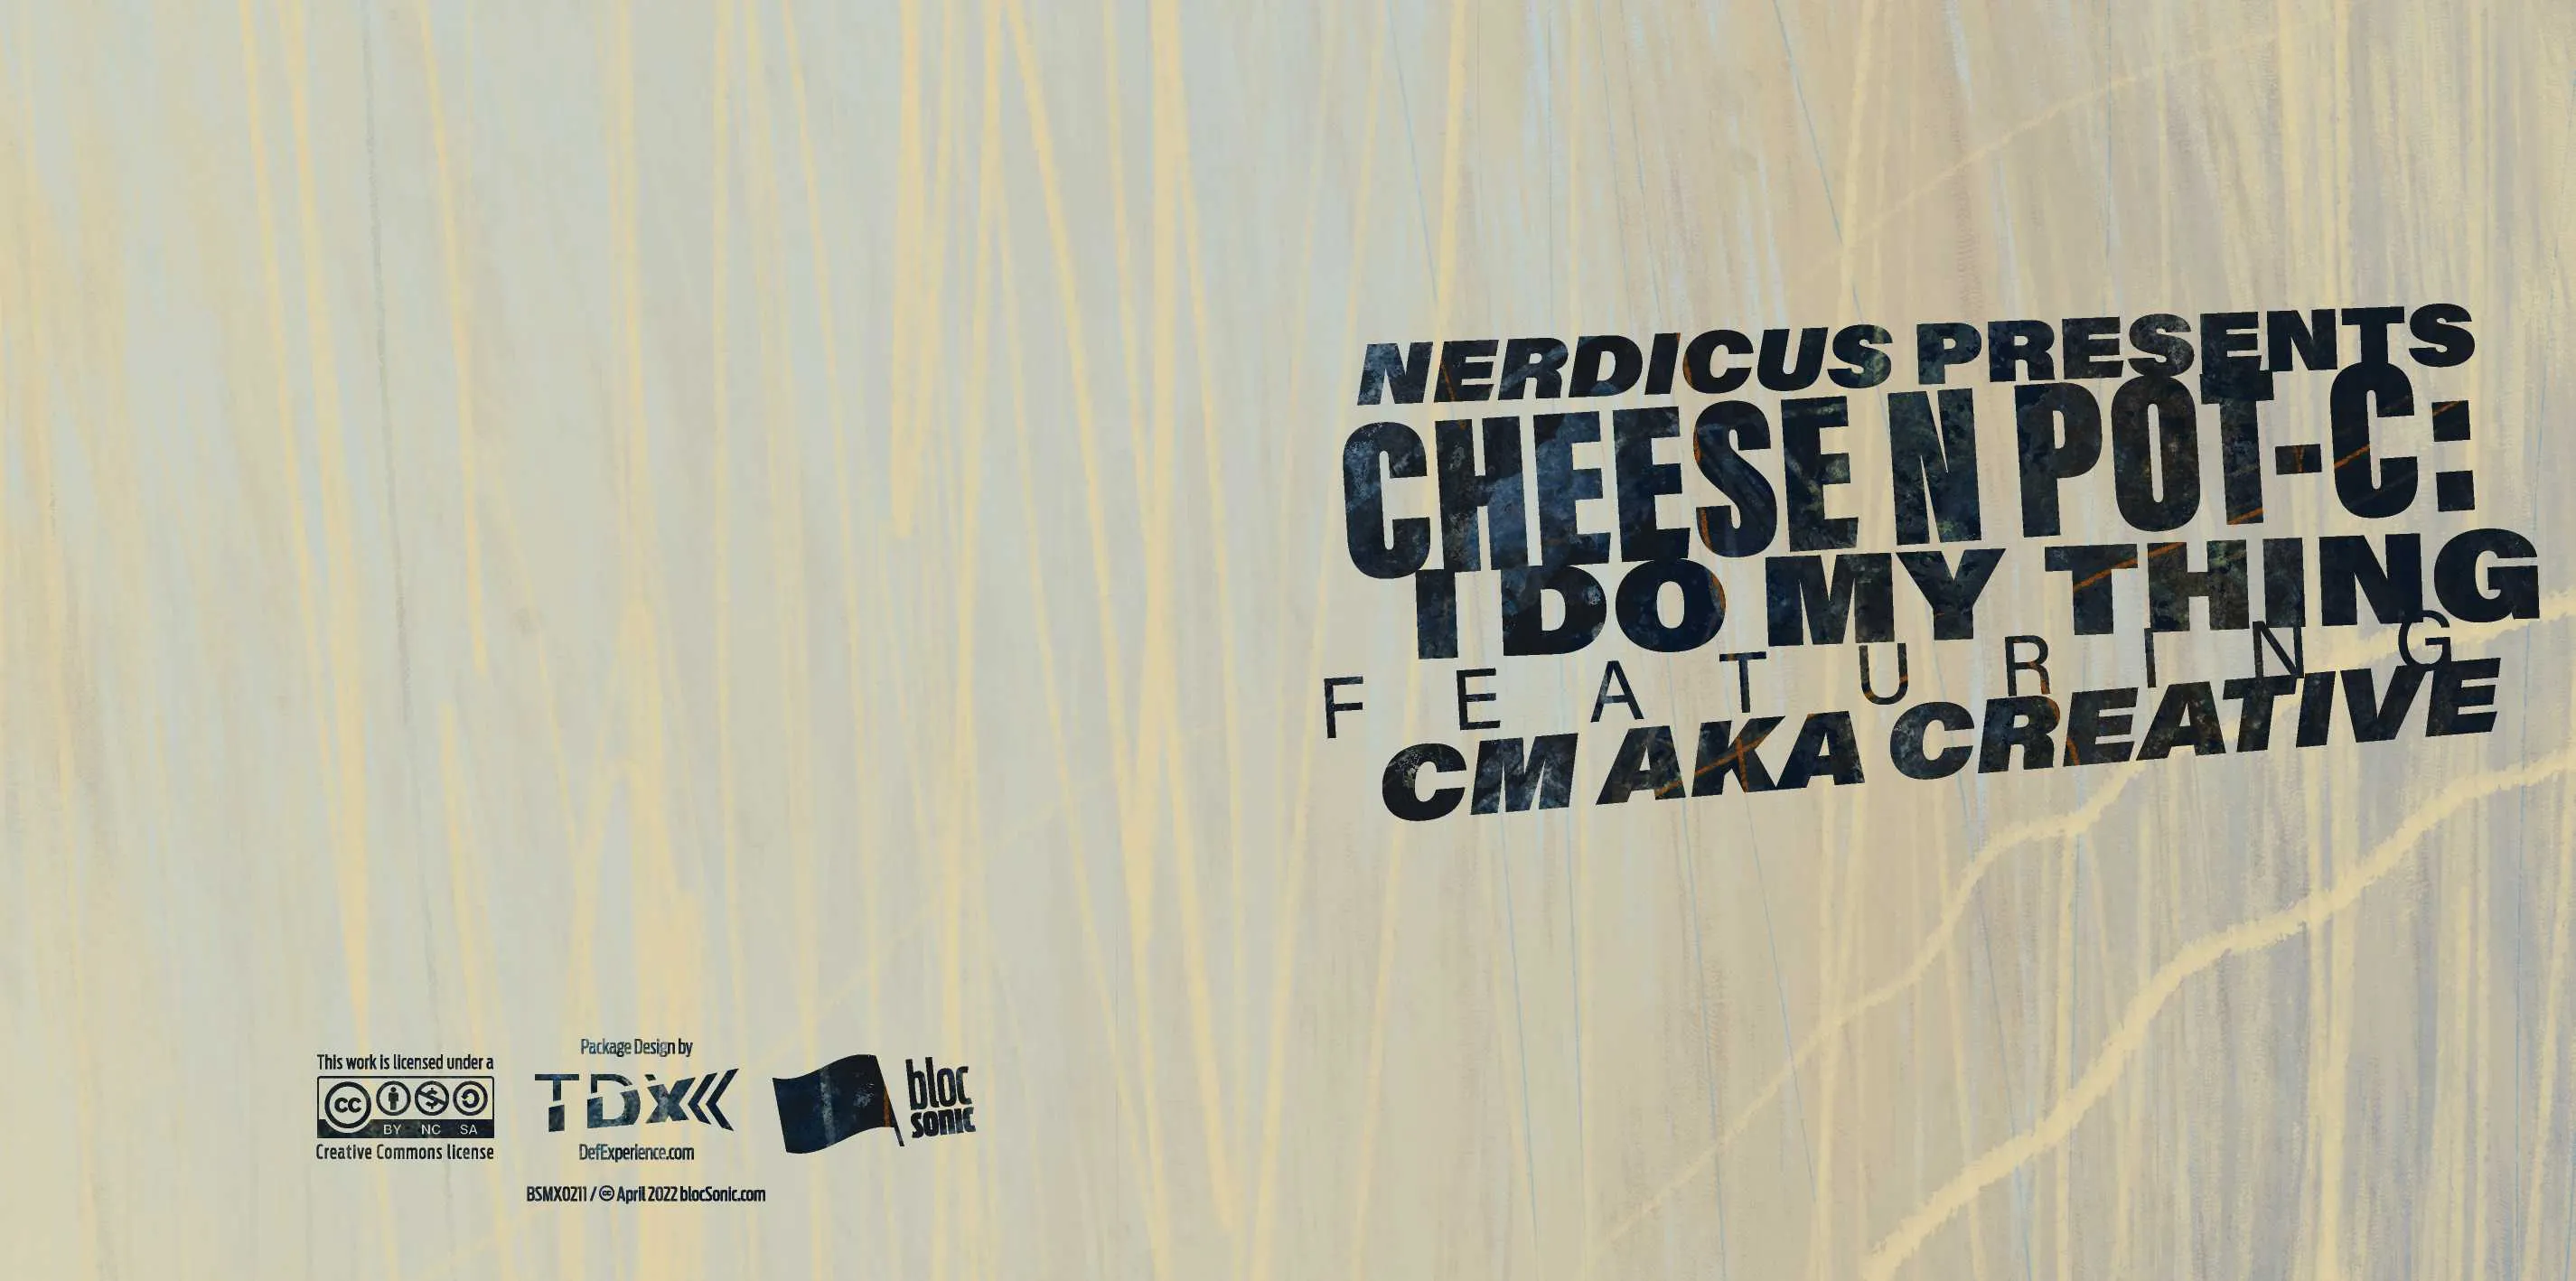 Album insert for “Nerdicus Presents Cheese N Pot-C: I Do My Thing (Featuring CM aka Creative)” by Cheese N Pot-C